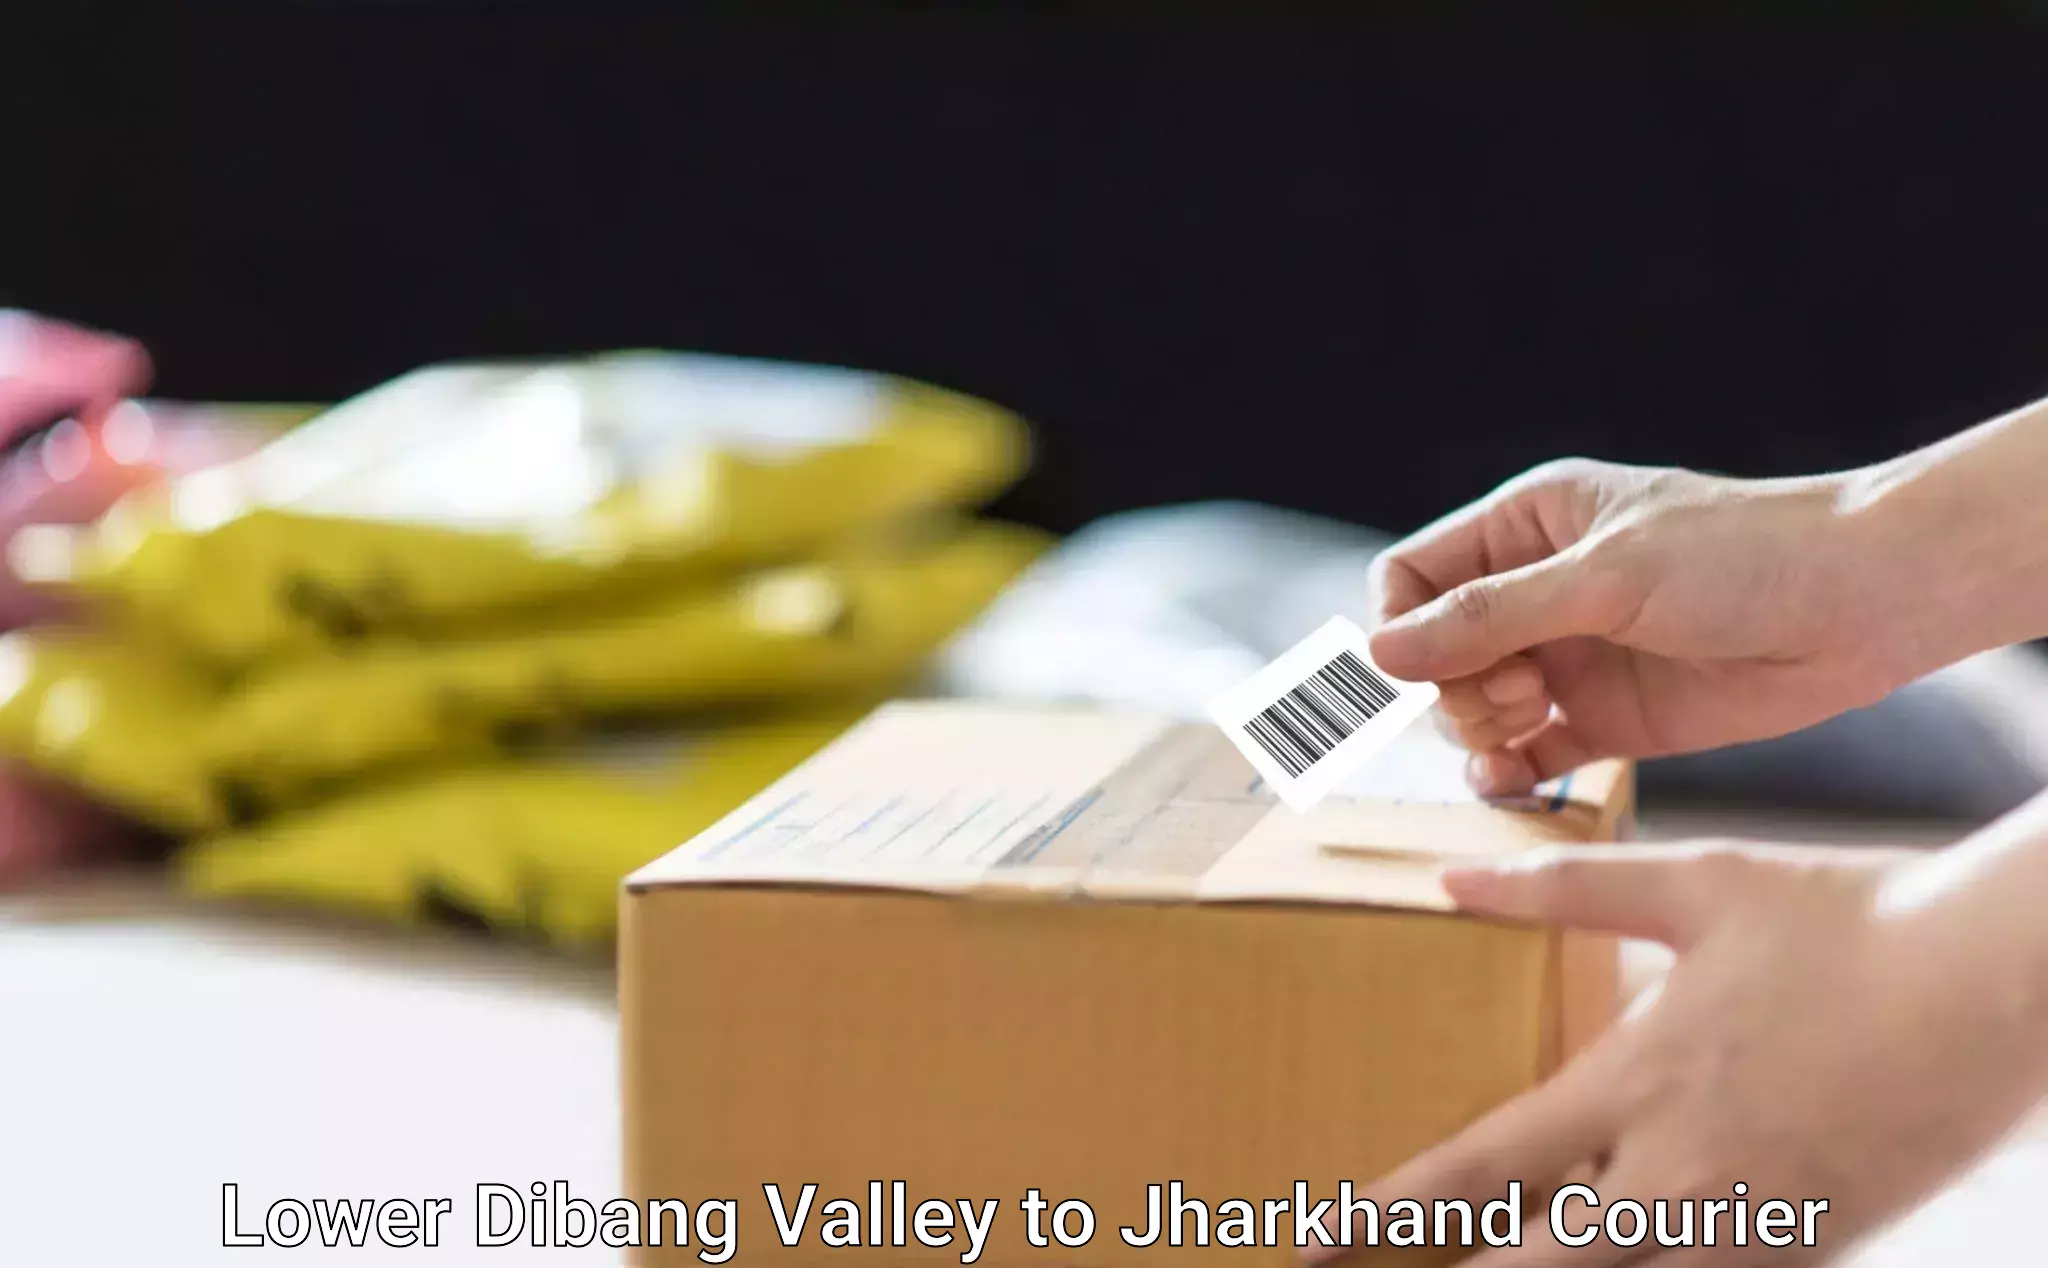 State-of-the-art courier technology in Lower Dibang Valley to Jharkhand